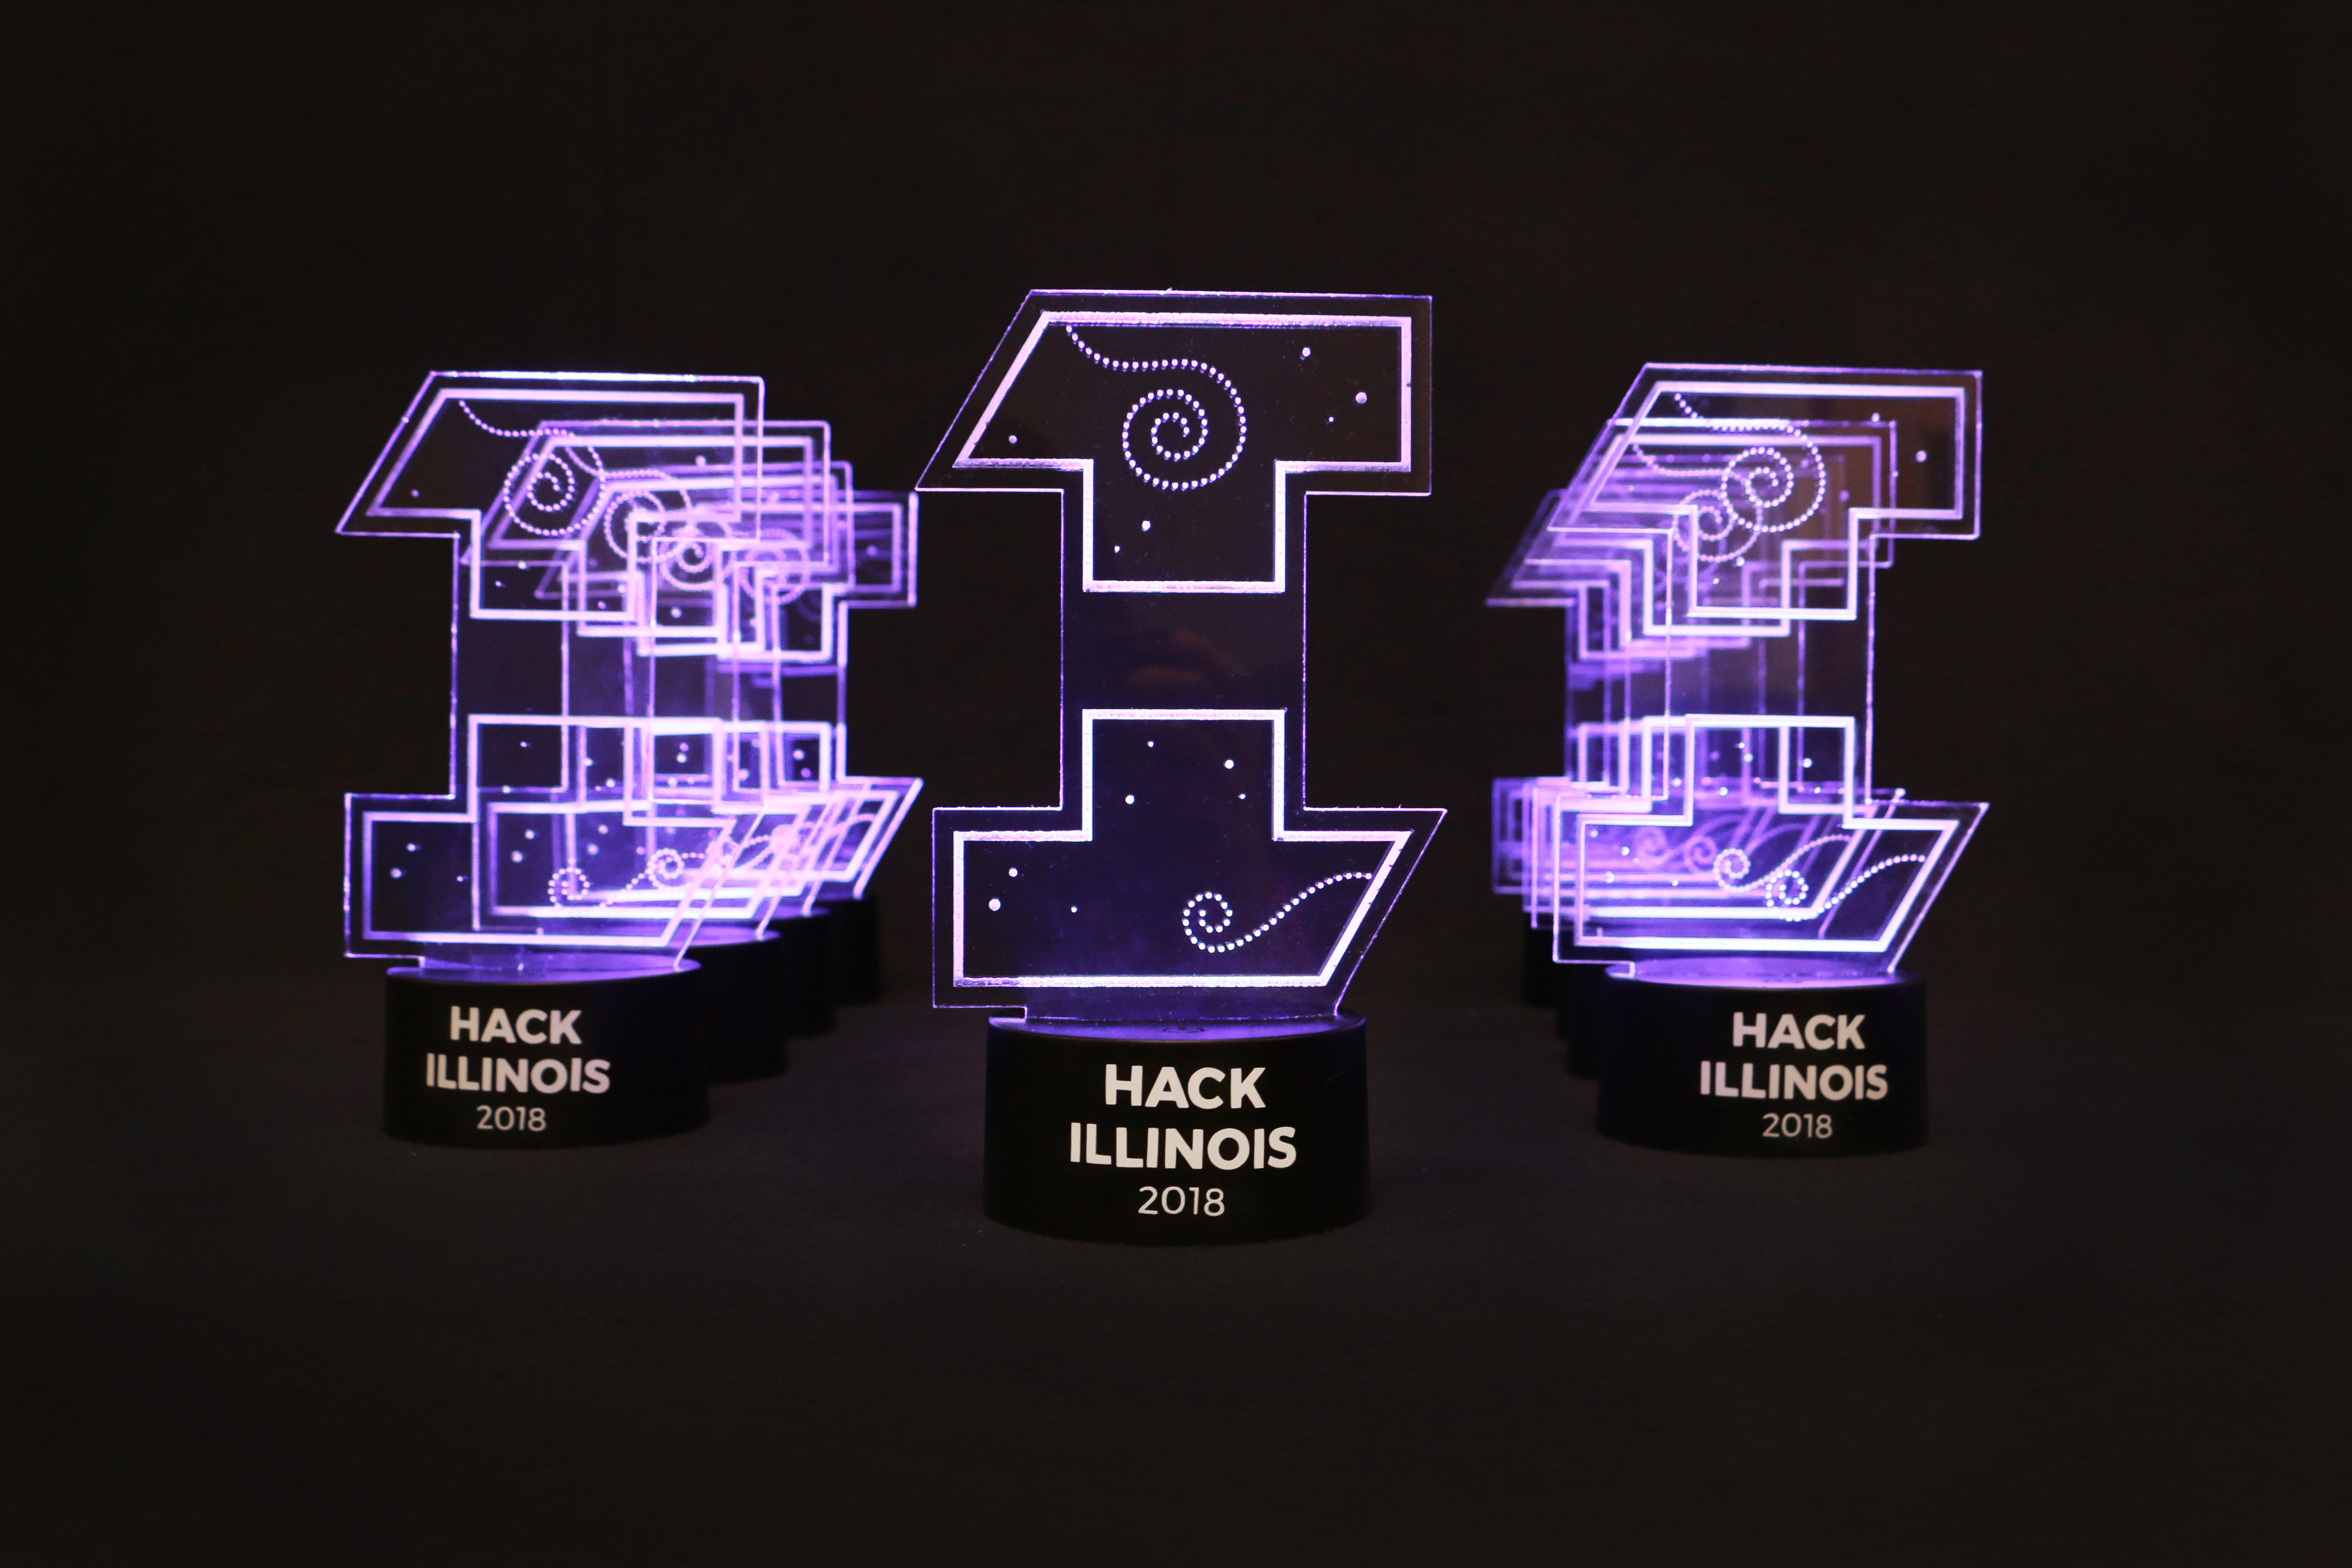 The trophies given to the HackIllinois 2018 winners.